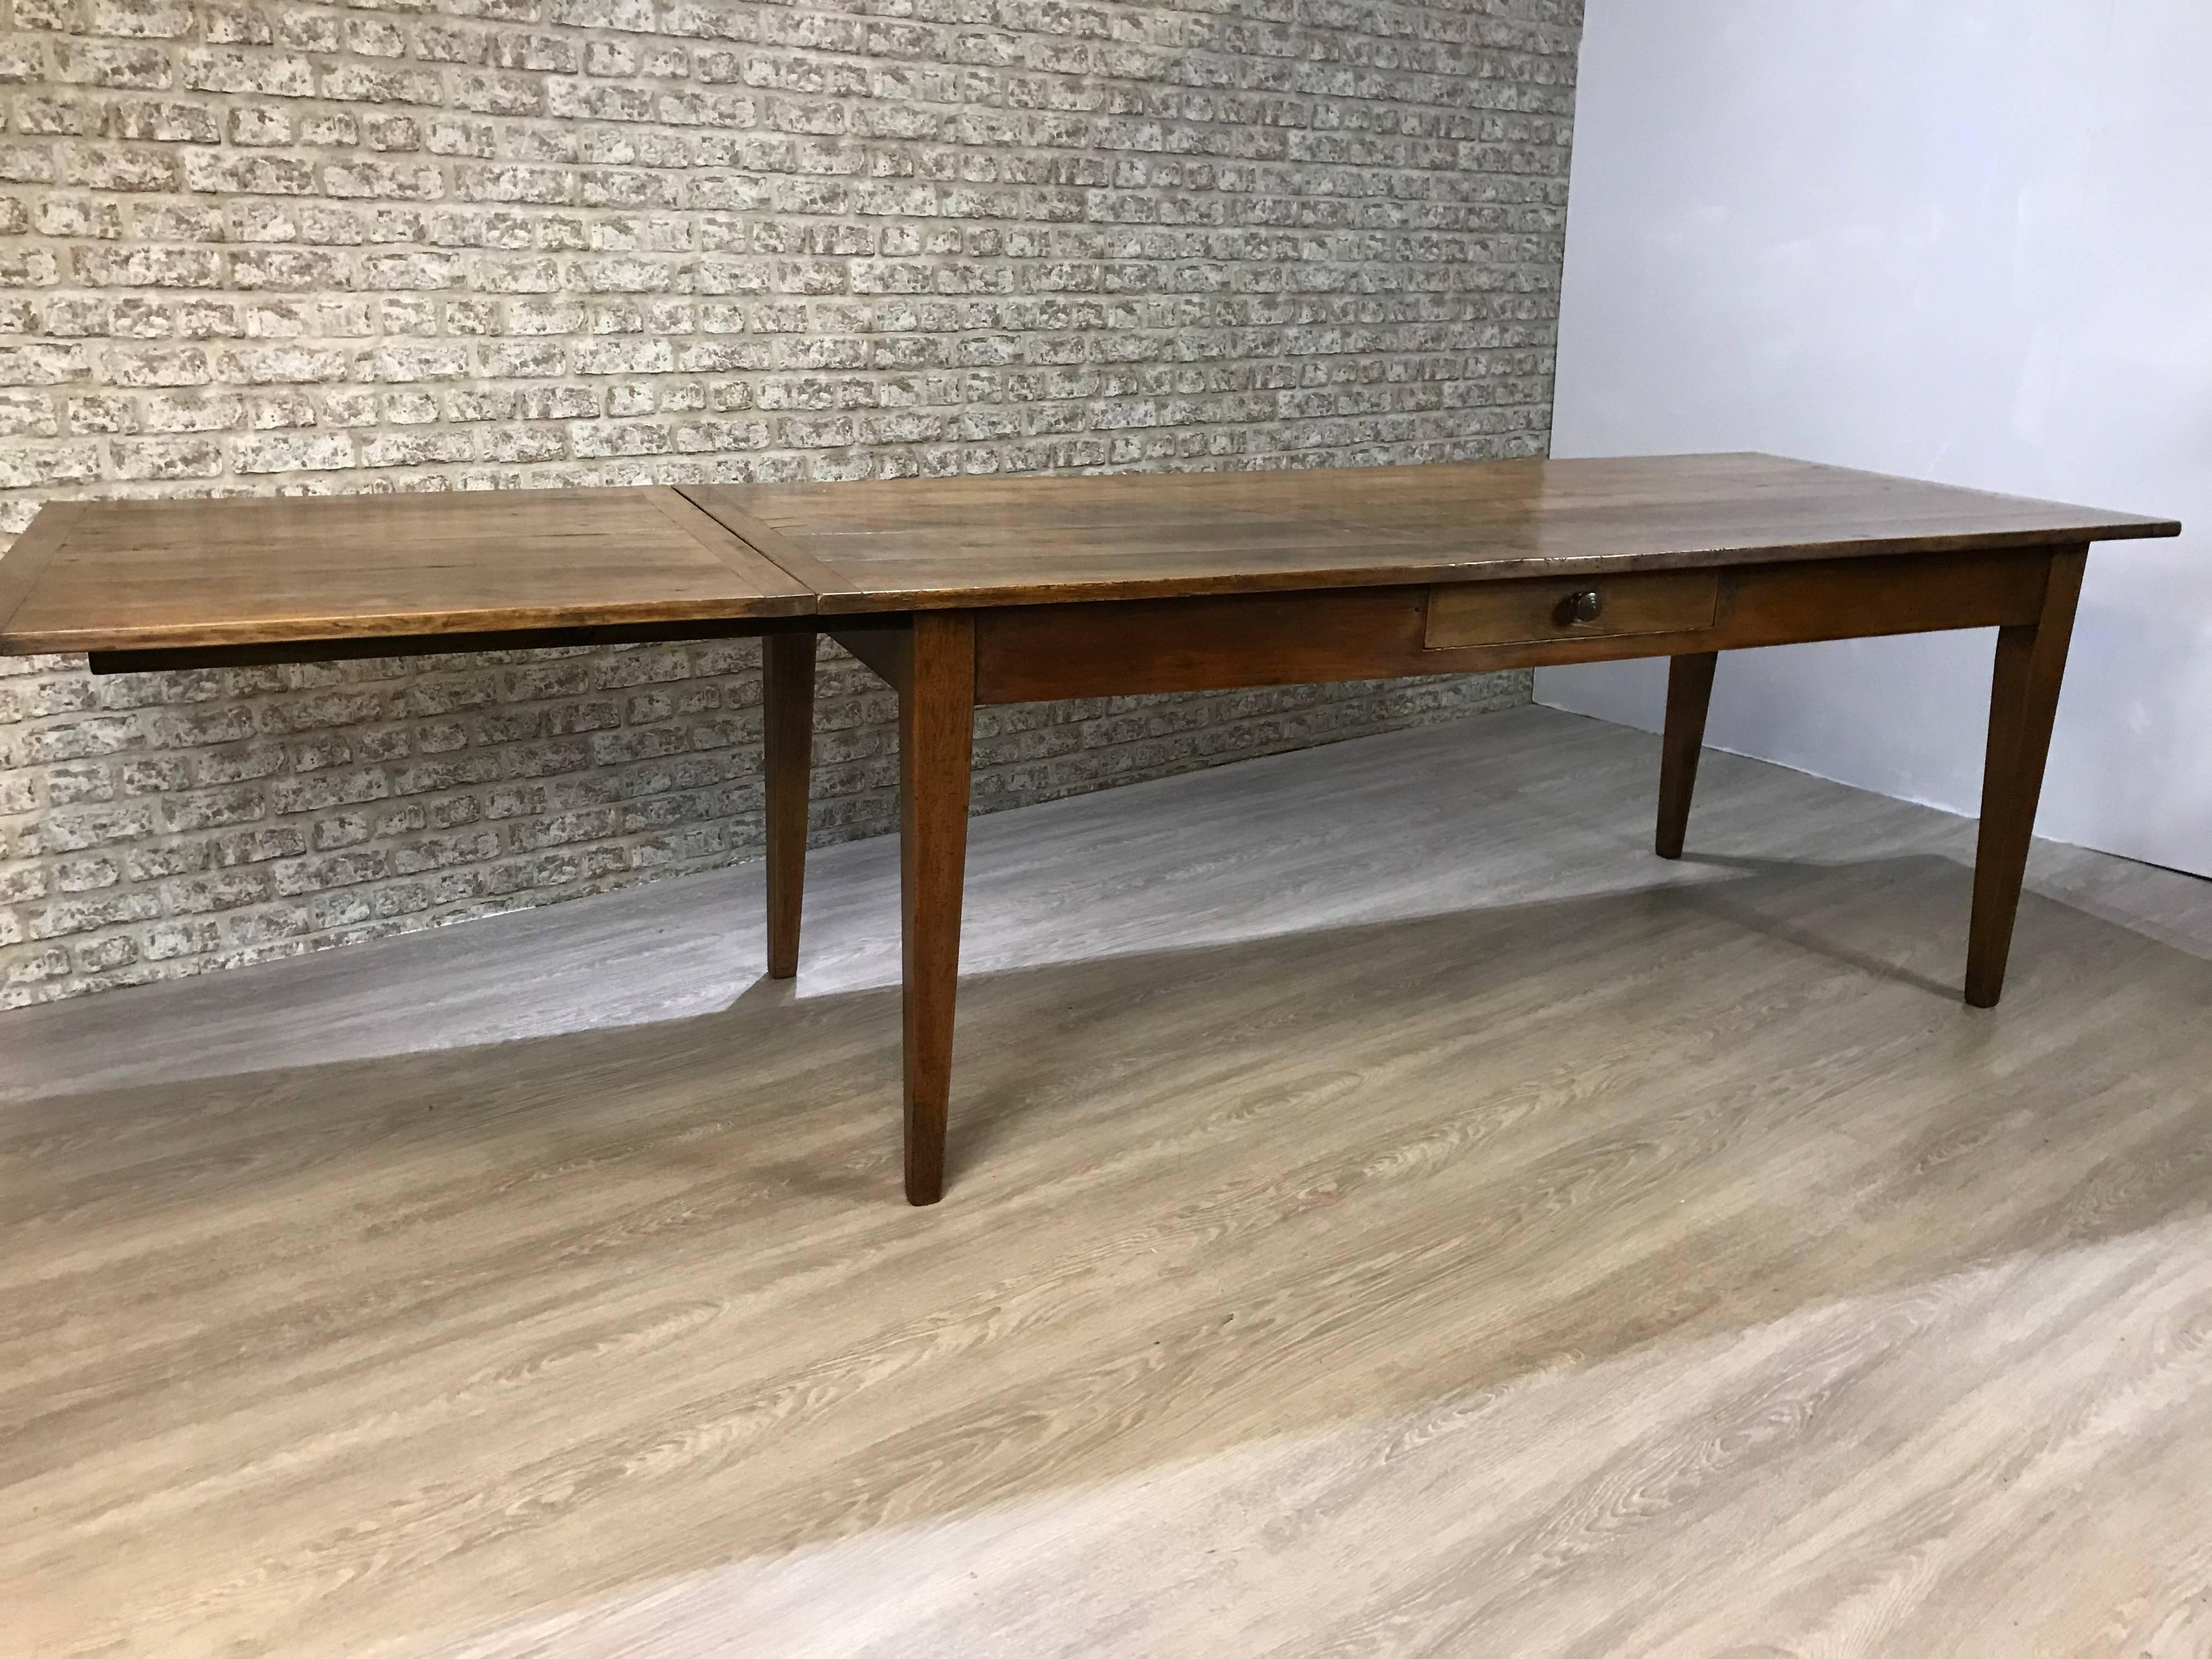 Lovely wide antique cherry farmhouse table with extension leaf. The has a four plank top with cleated ends and sits on a sturdy frame supported by four tapered legs. The slide works on two strong bearers and can easily be stored away when not in use.